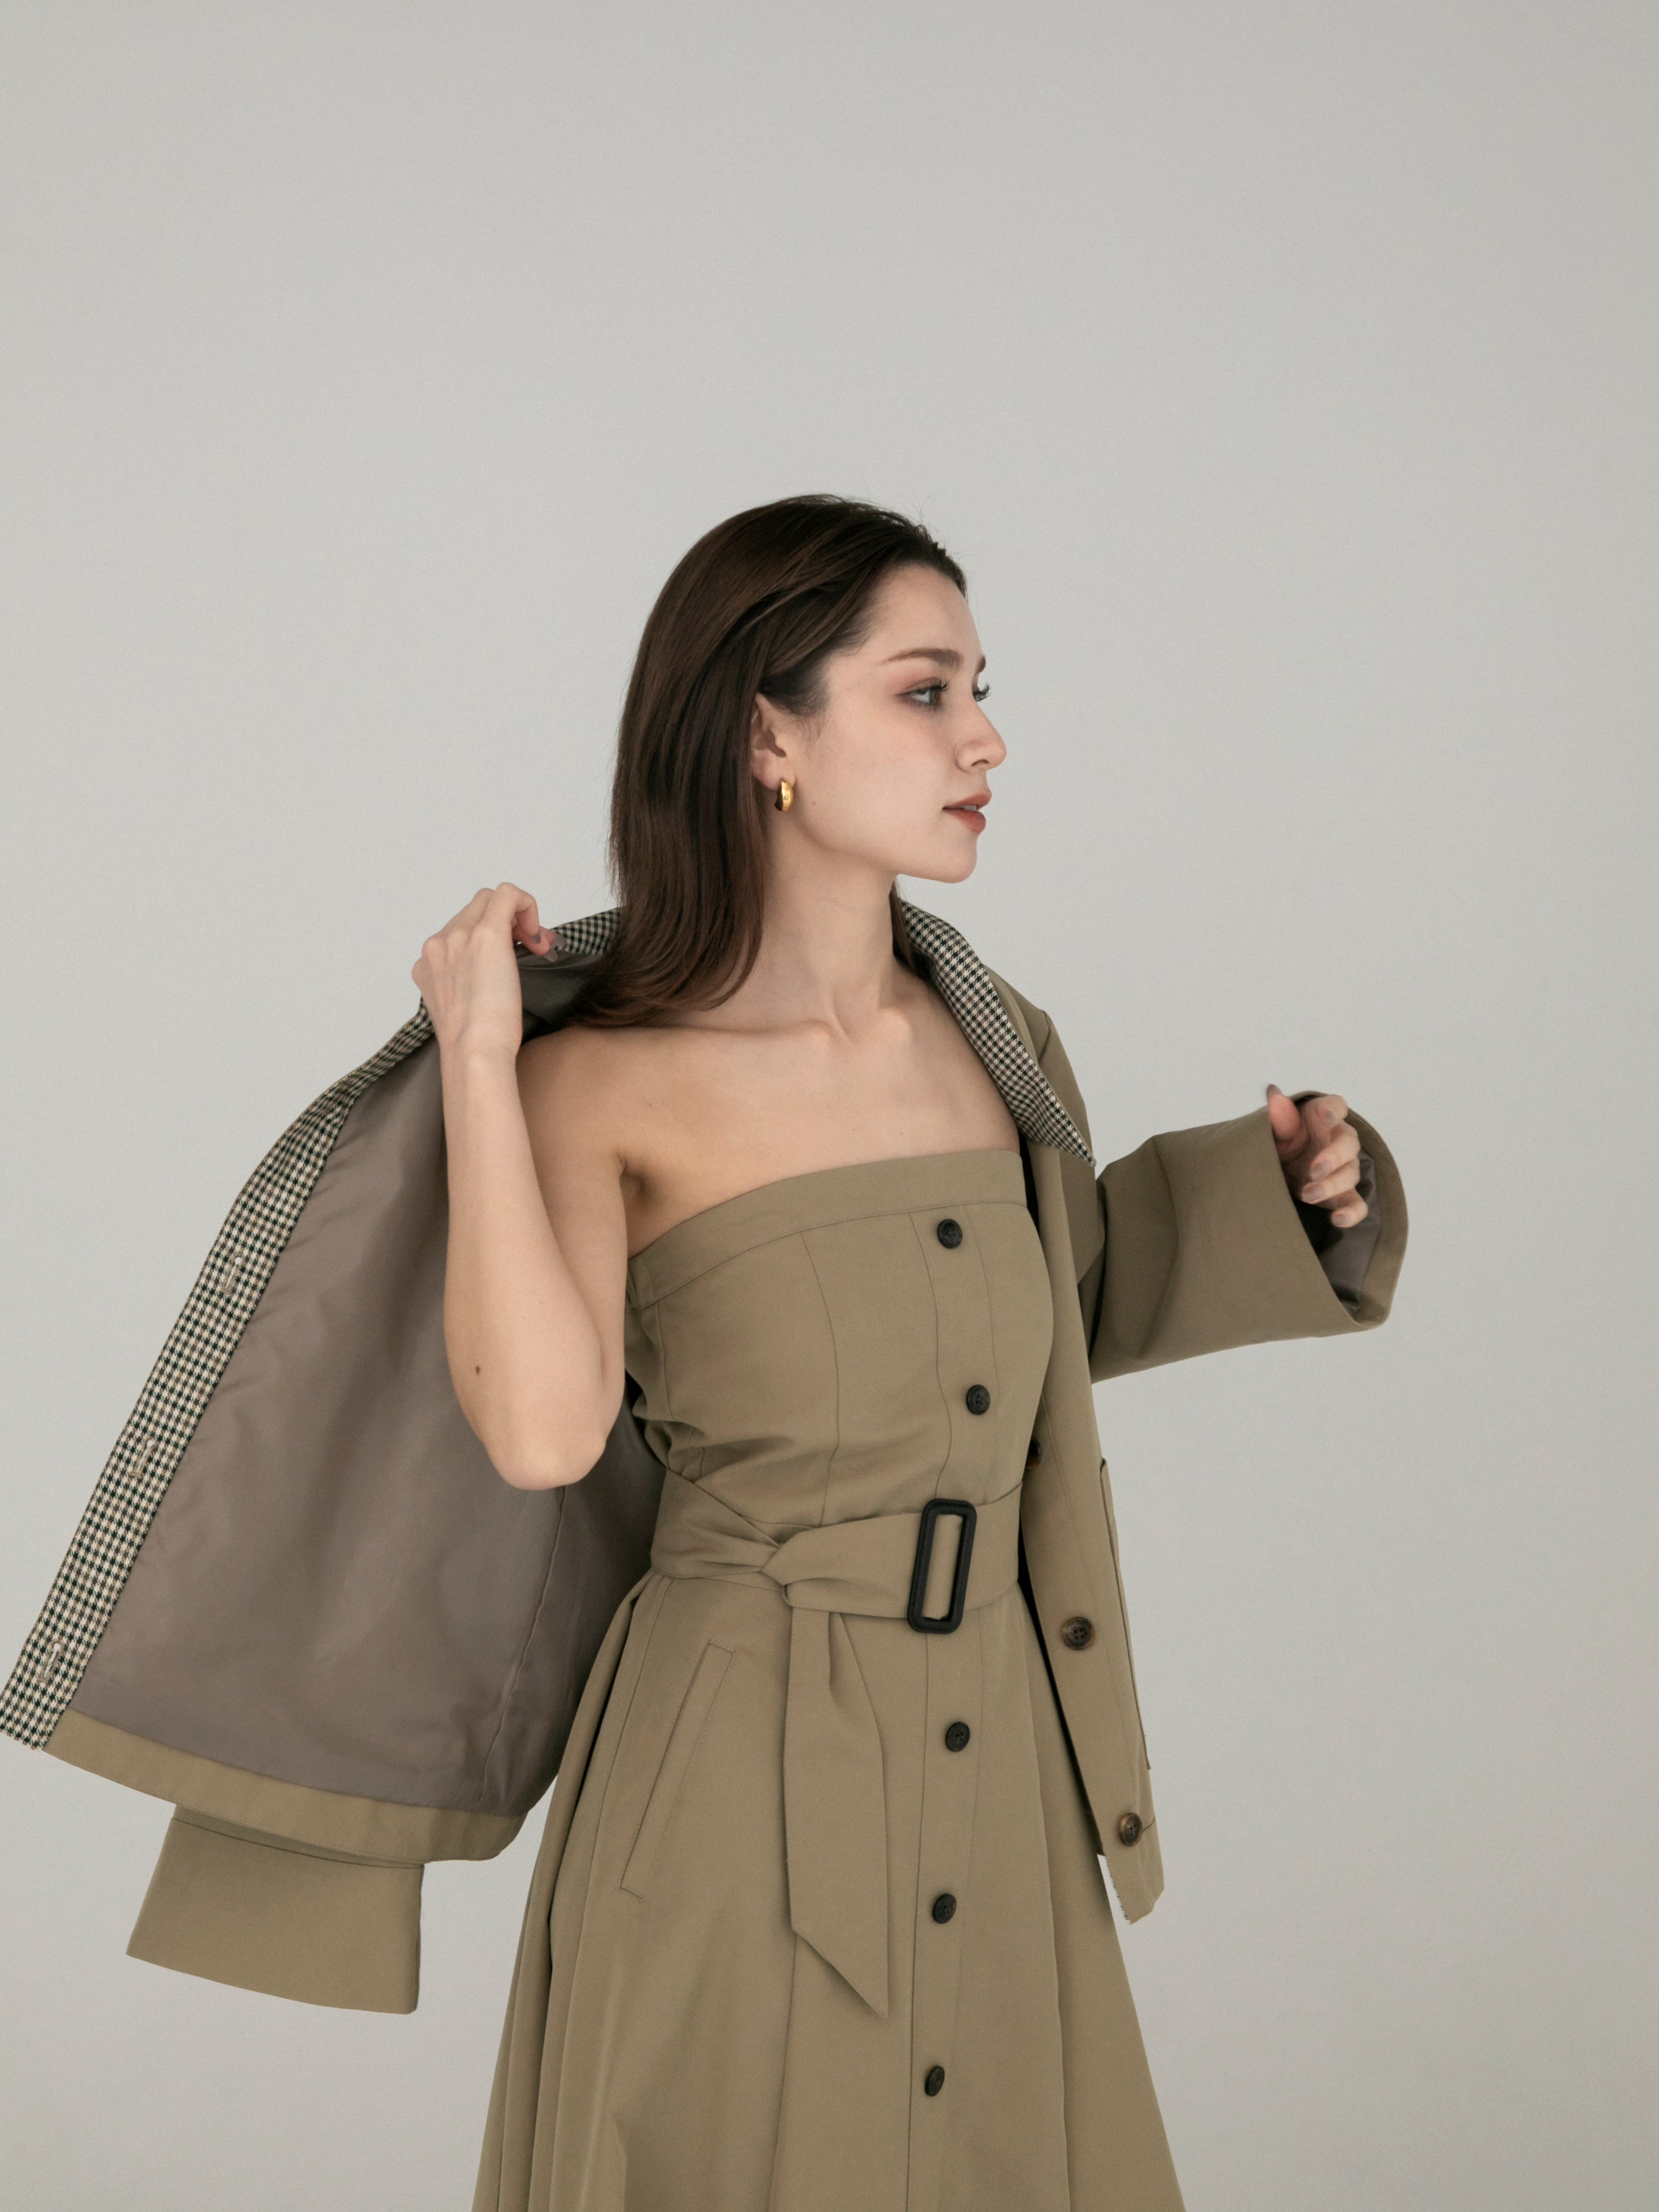 Bare top trench dress – RANCLIC